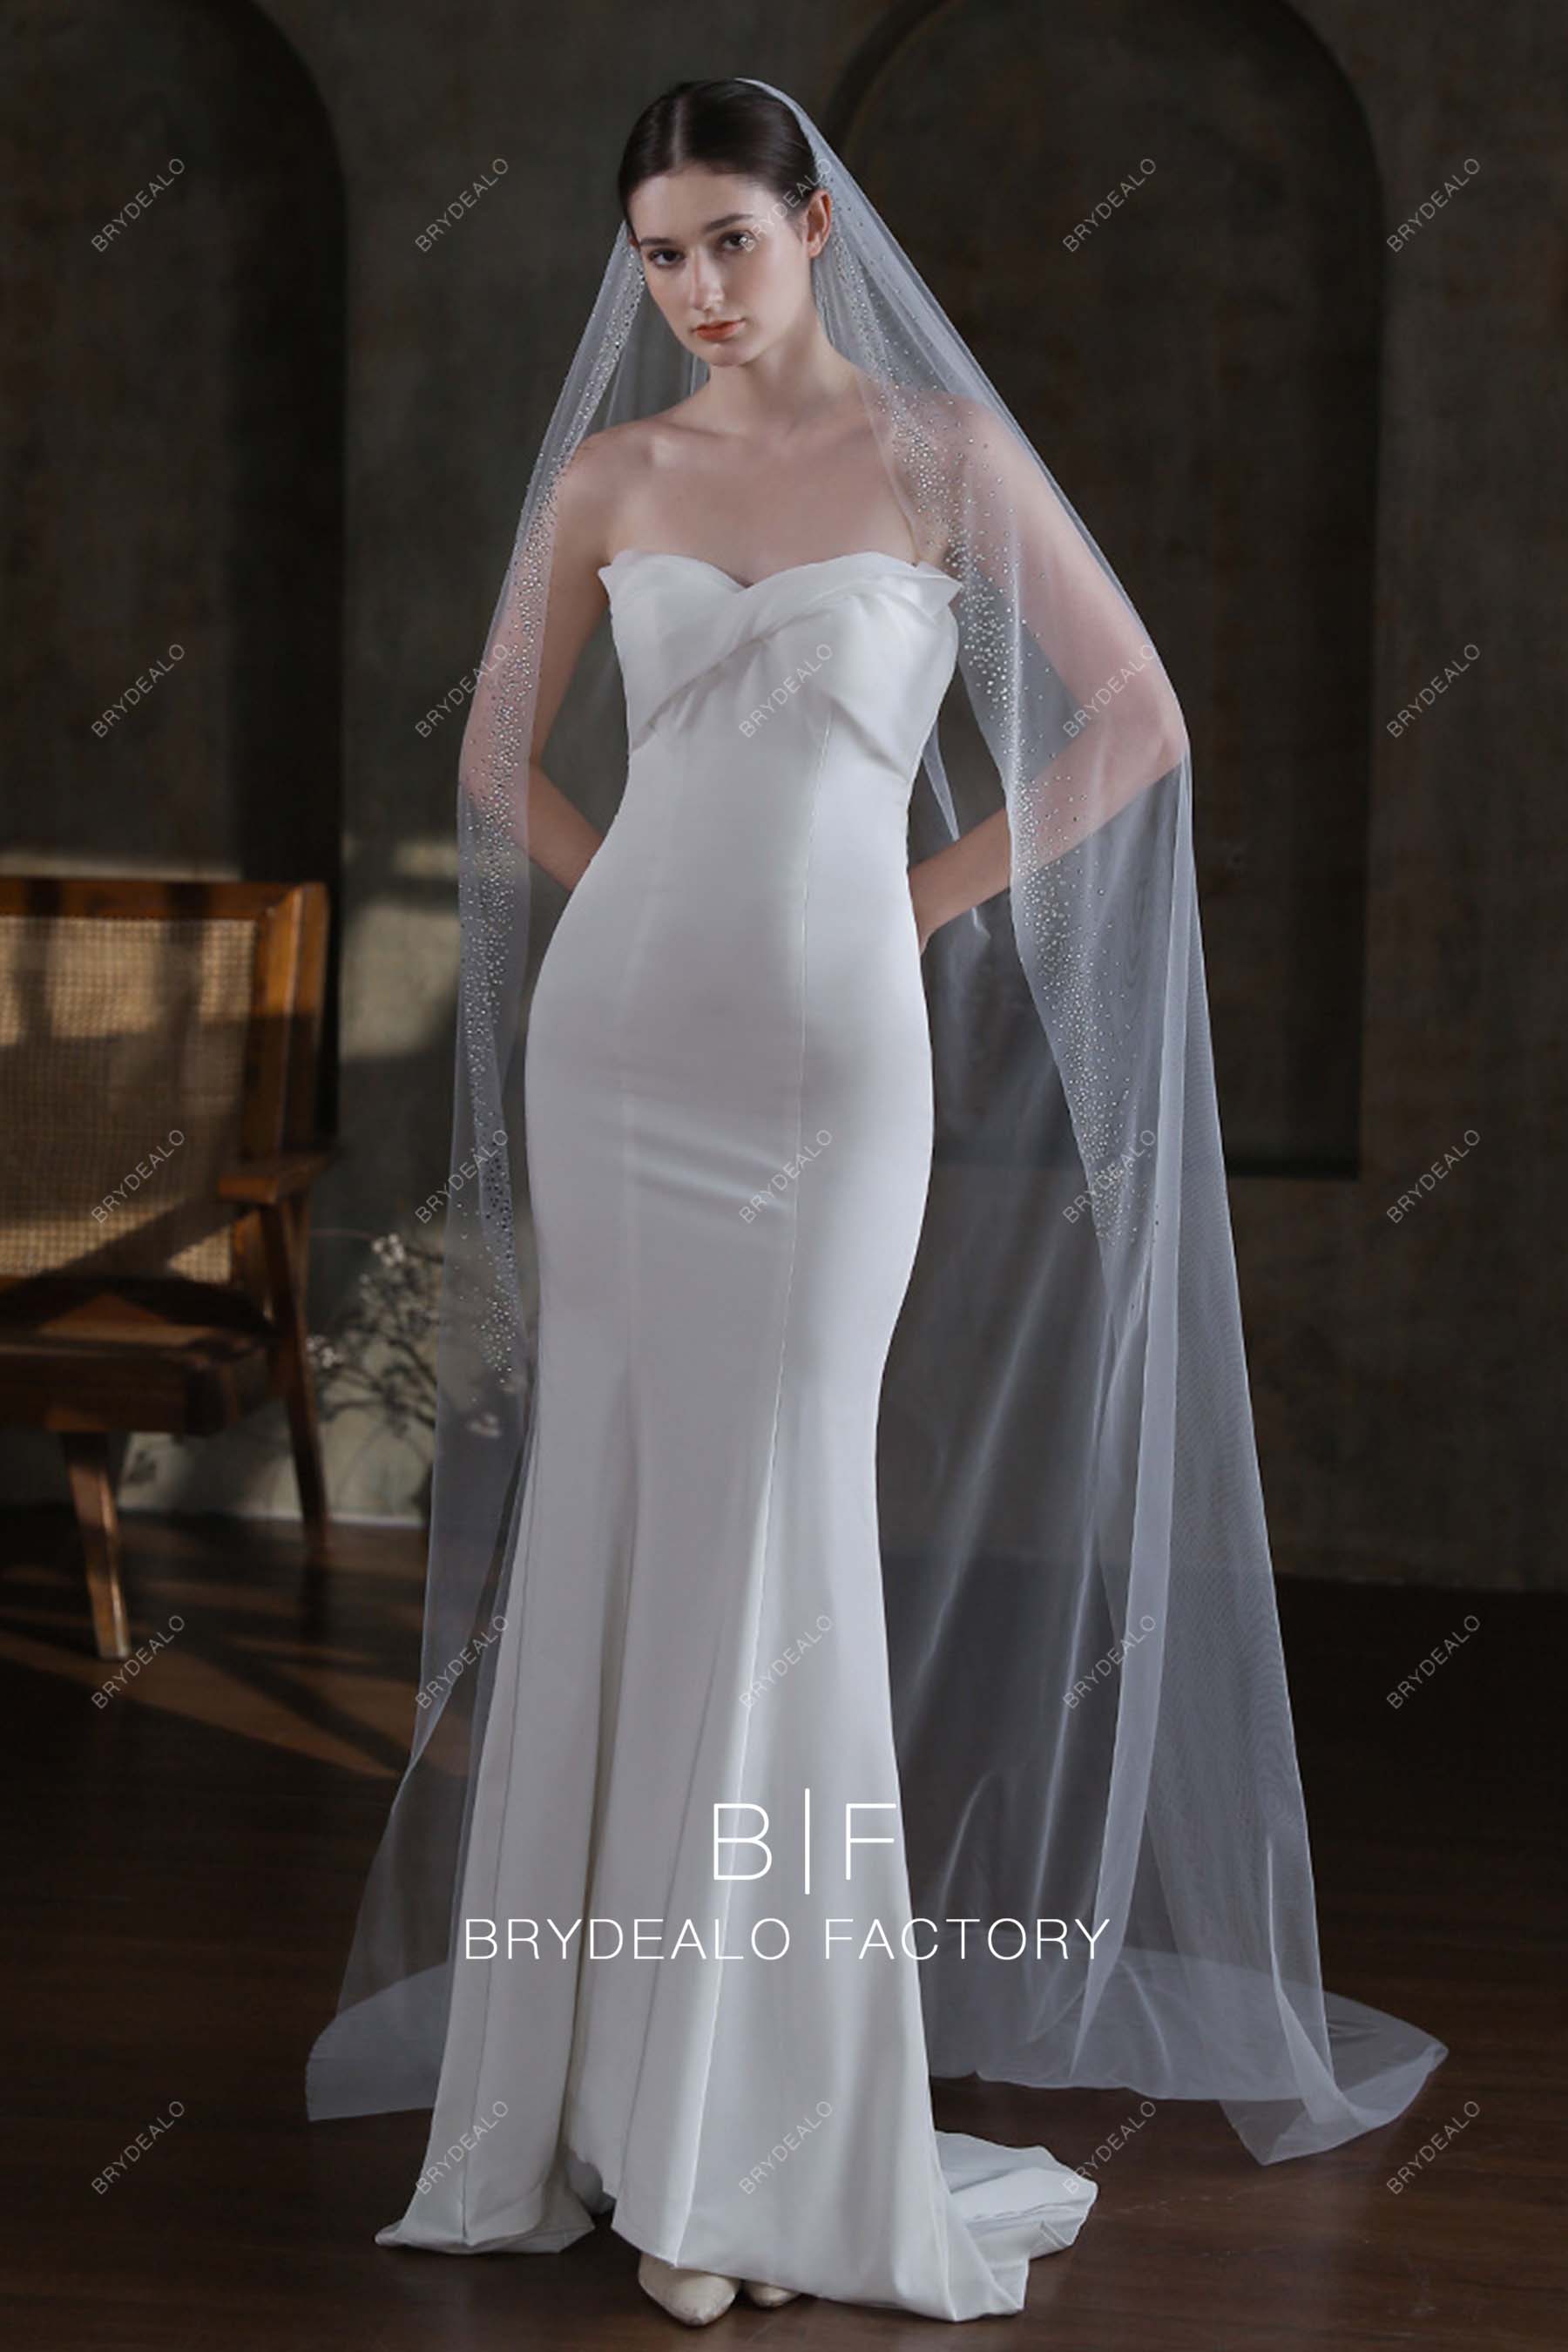 Single-tier Cathedral Length Wholesale Bridal Veil